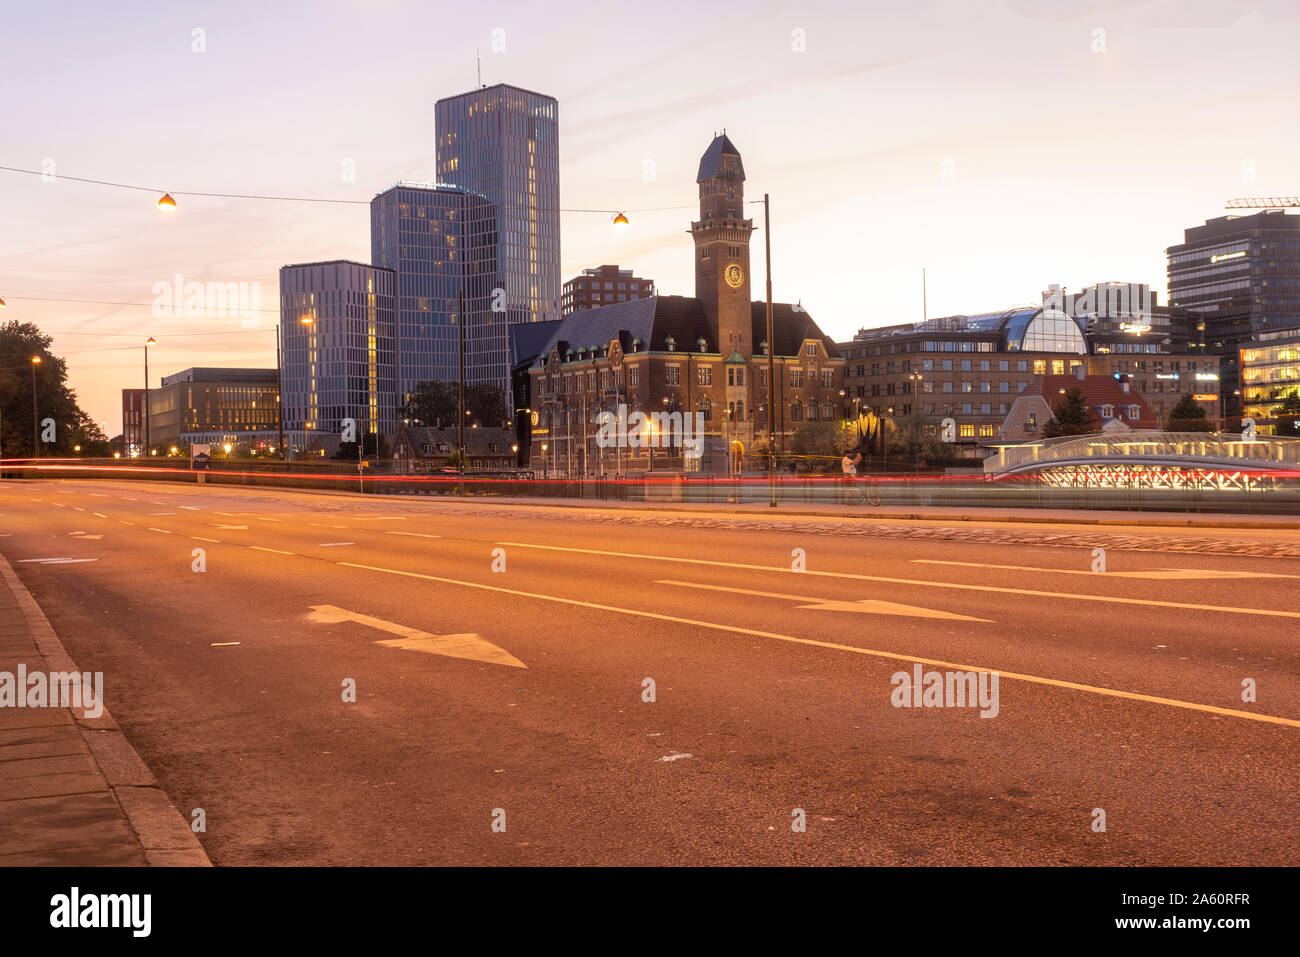 Light trails on street against sky at dusk in Malmo, Sweden Stock Photo